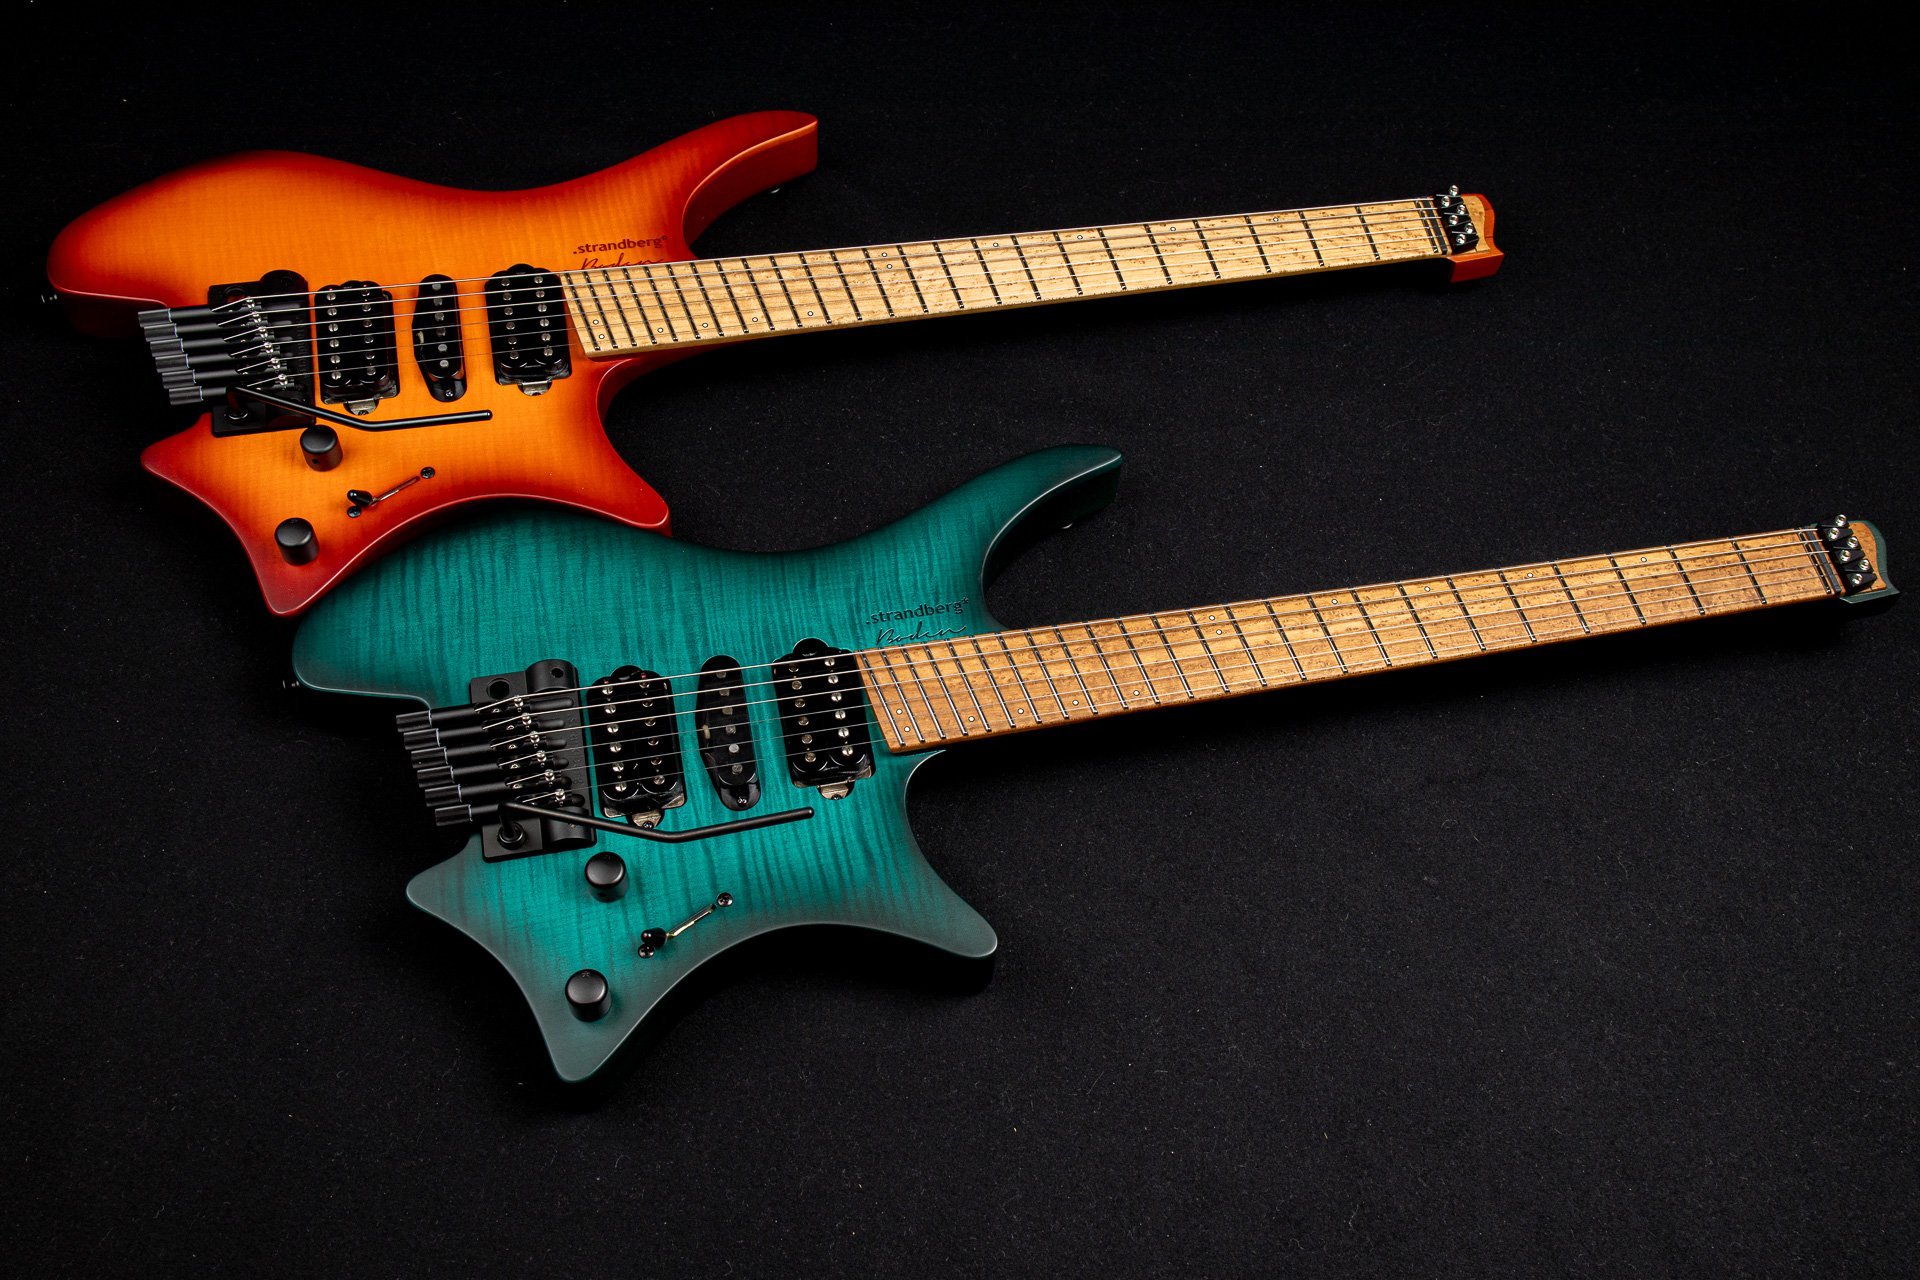 Boden Neck Through headless guitars orange and trans teal side by side